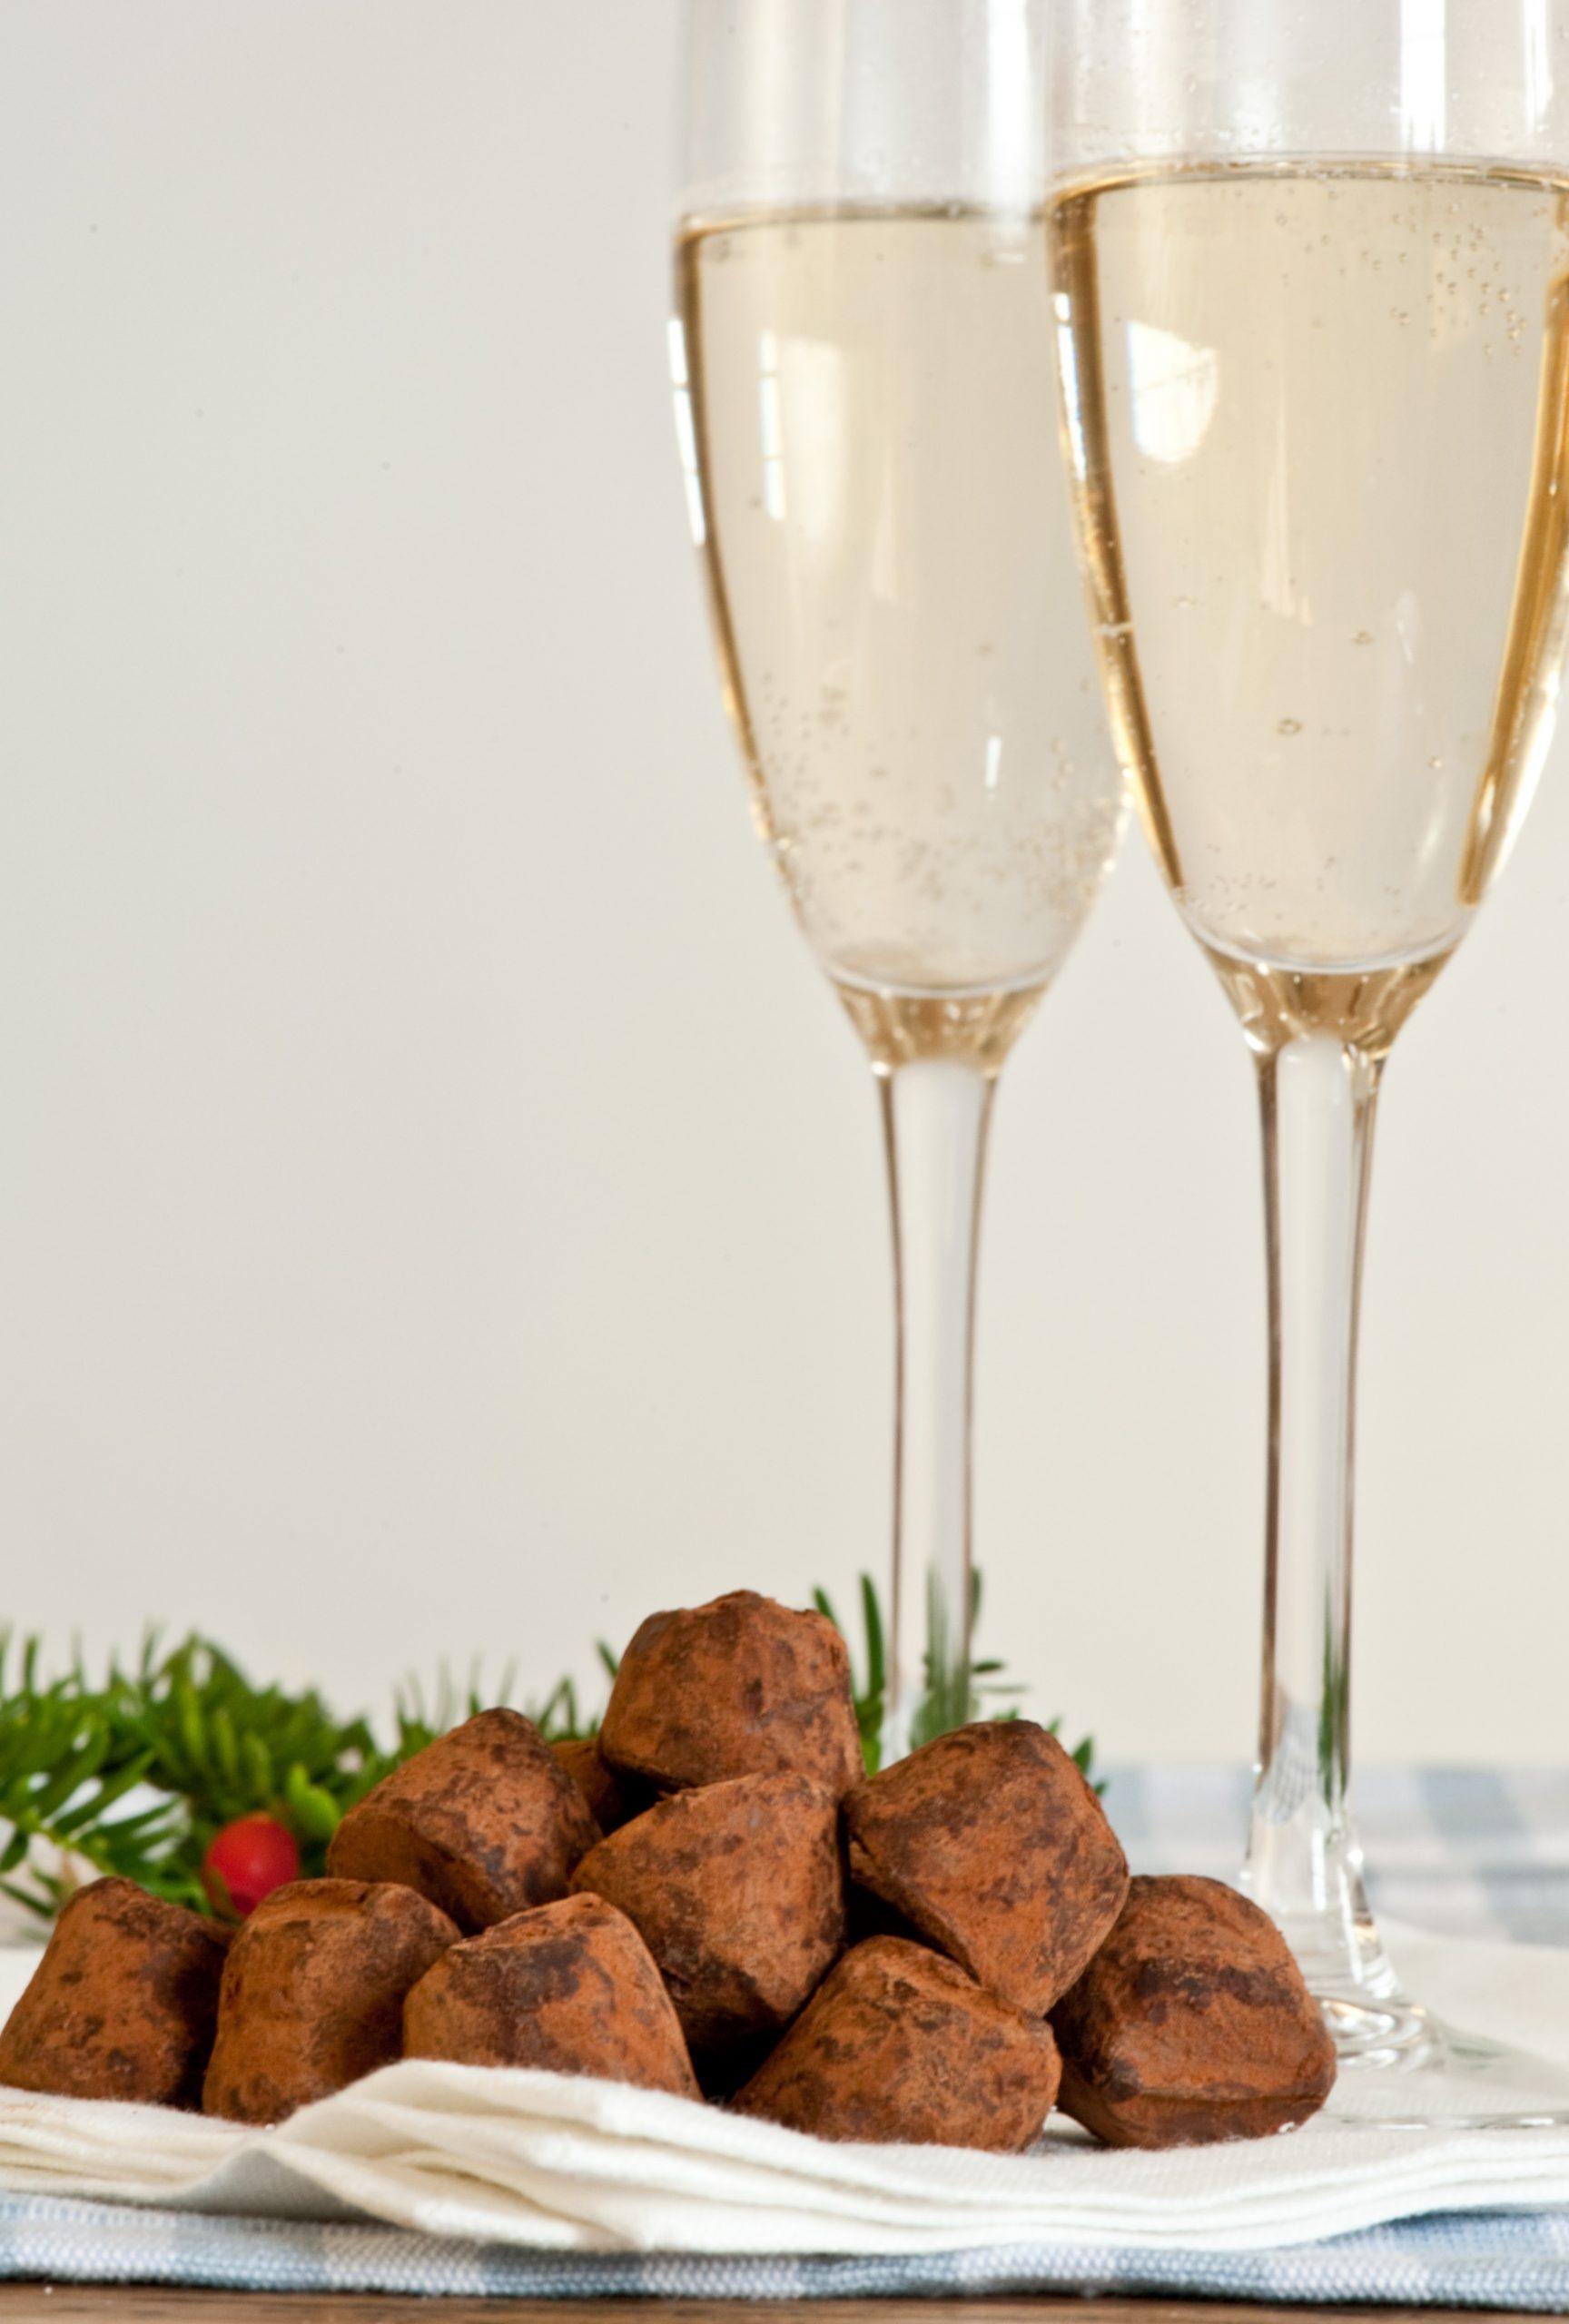 Champagne in Glasses and Chocolate Truffles